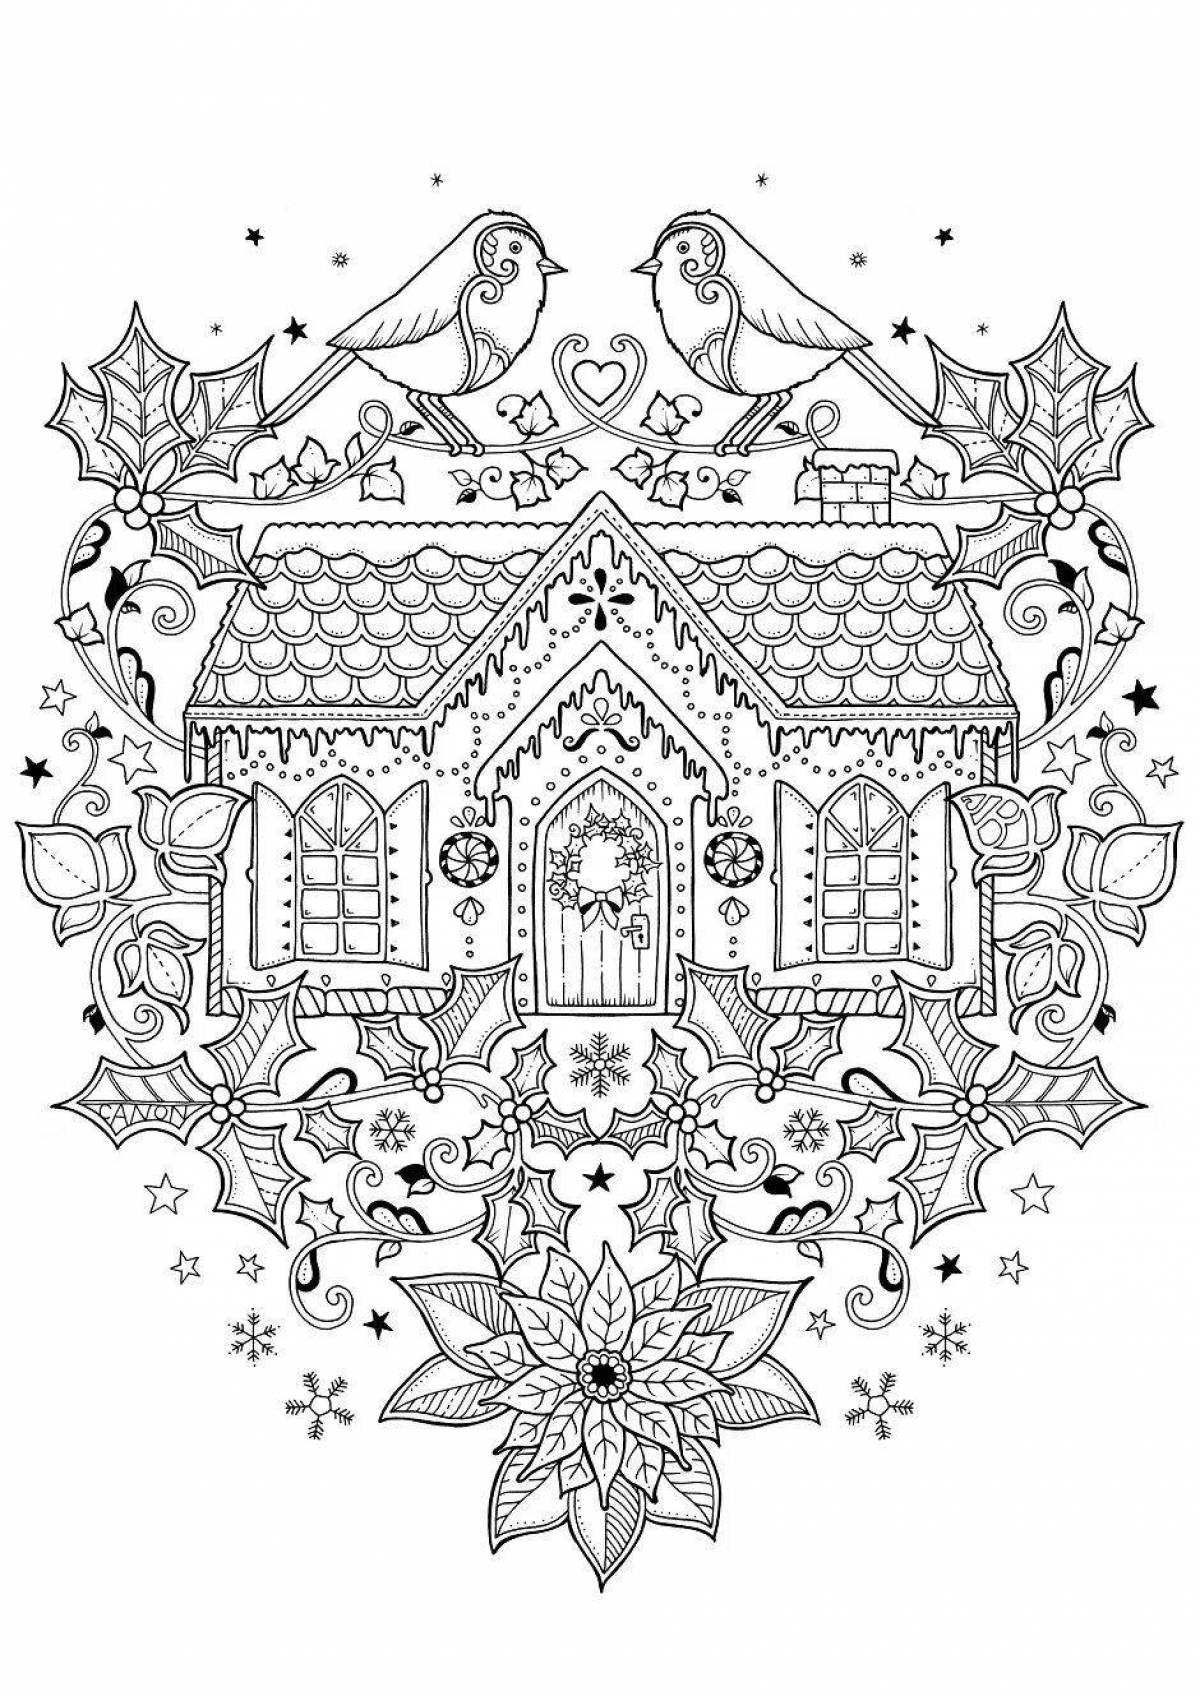 Awesome anti-stress christmas coloring book